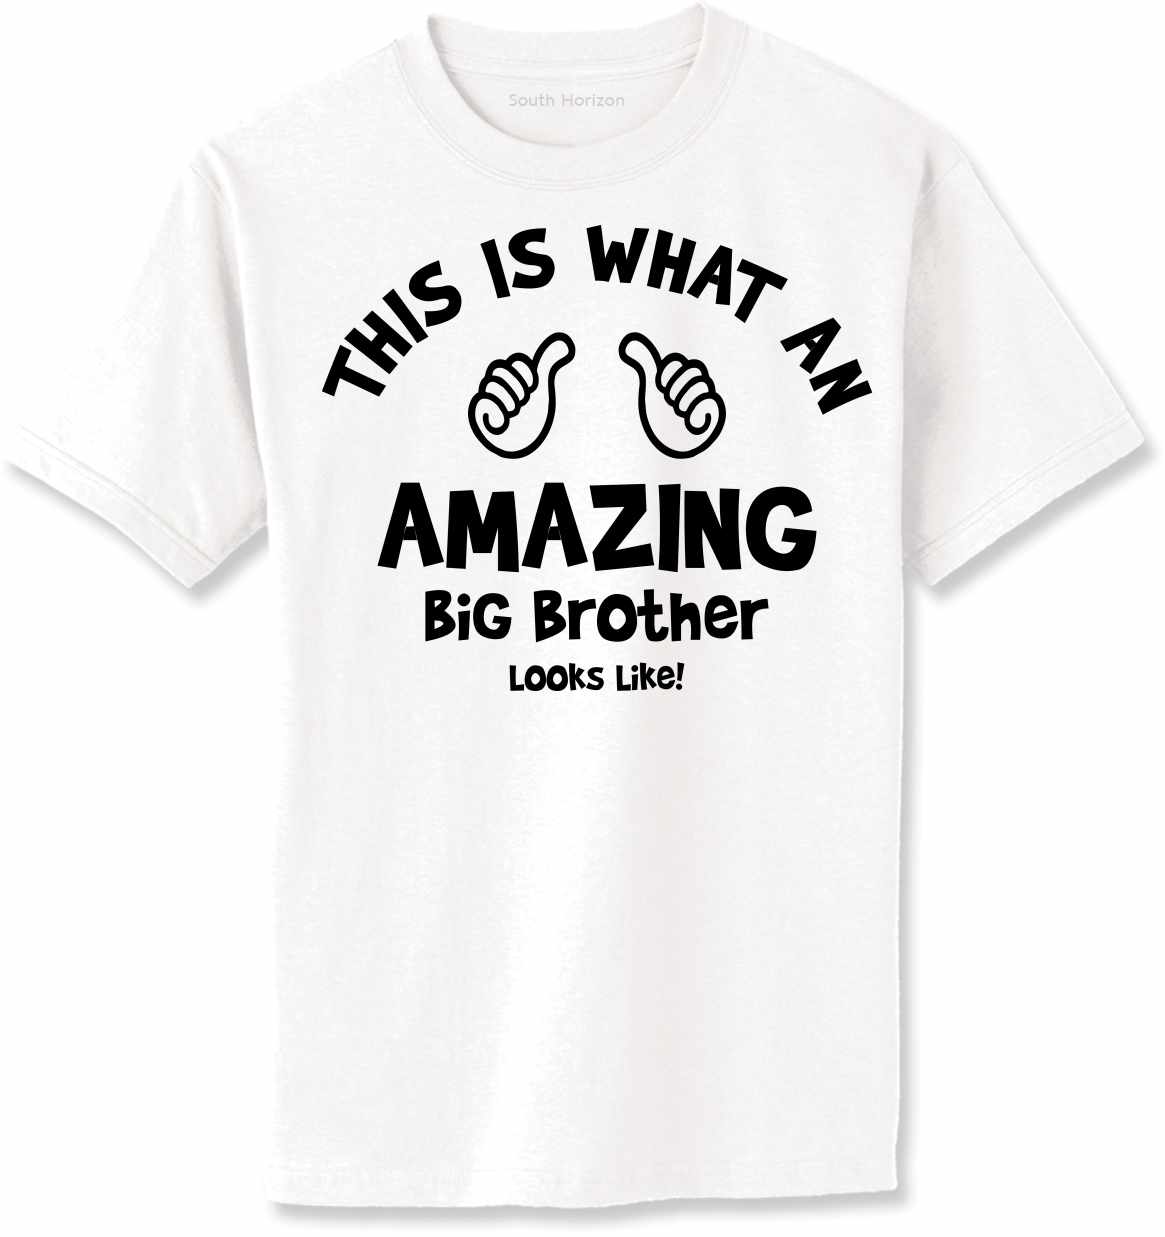 This is What an AMAZING Big Brother Looks Like Adult T-Shirt (#1115-1)